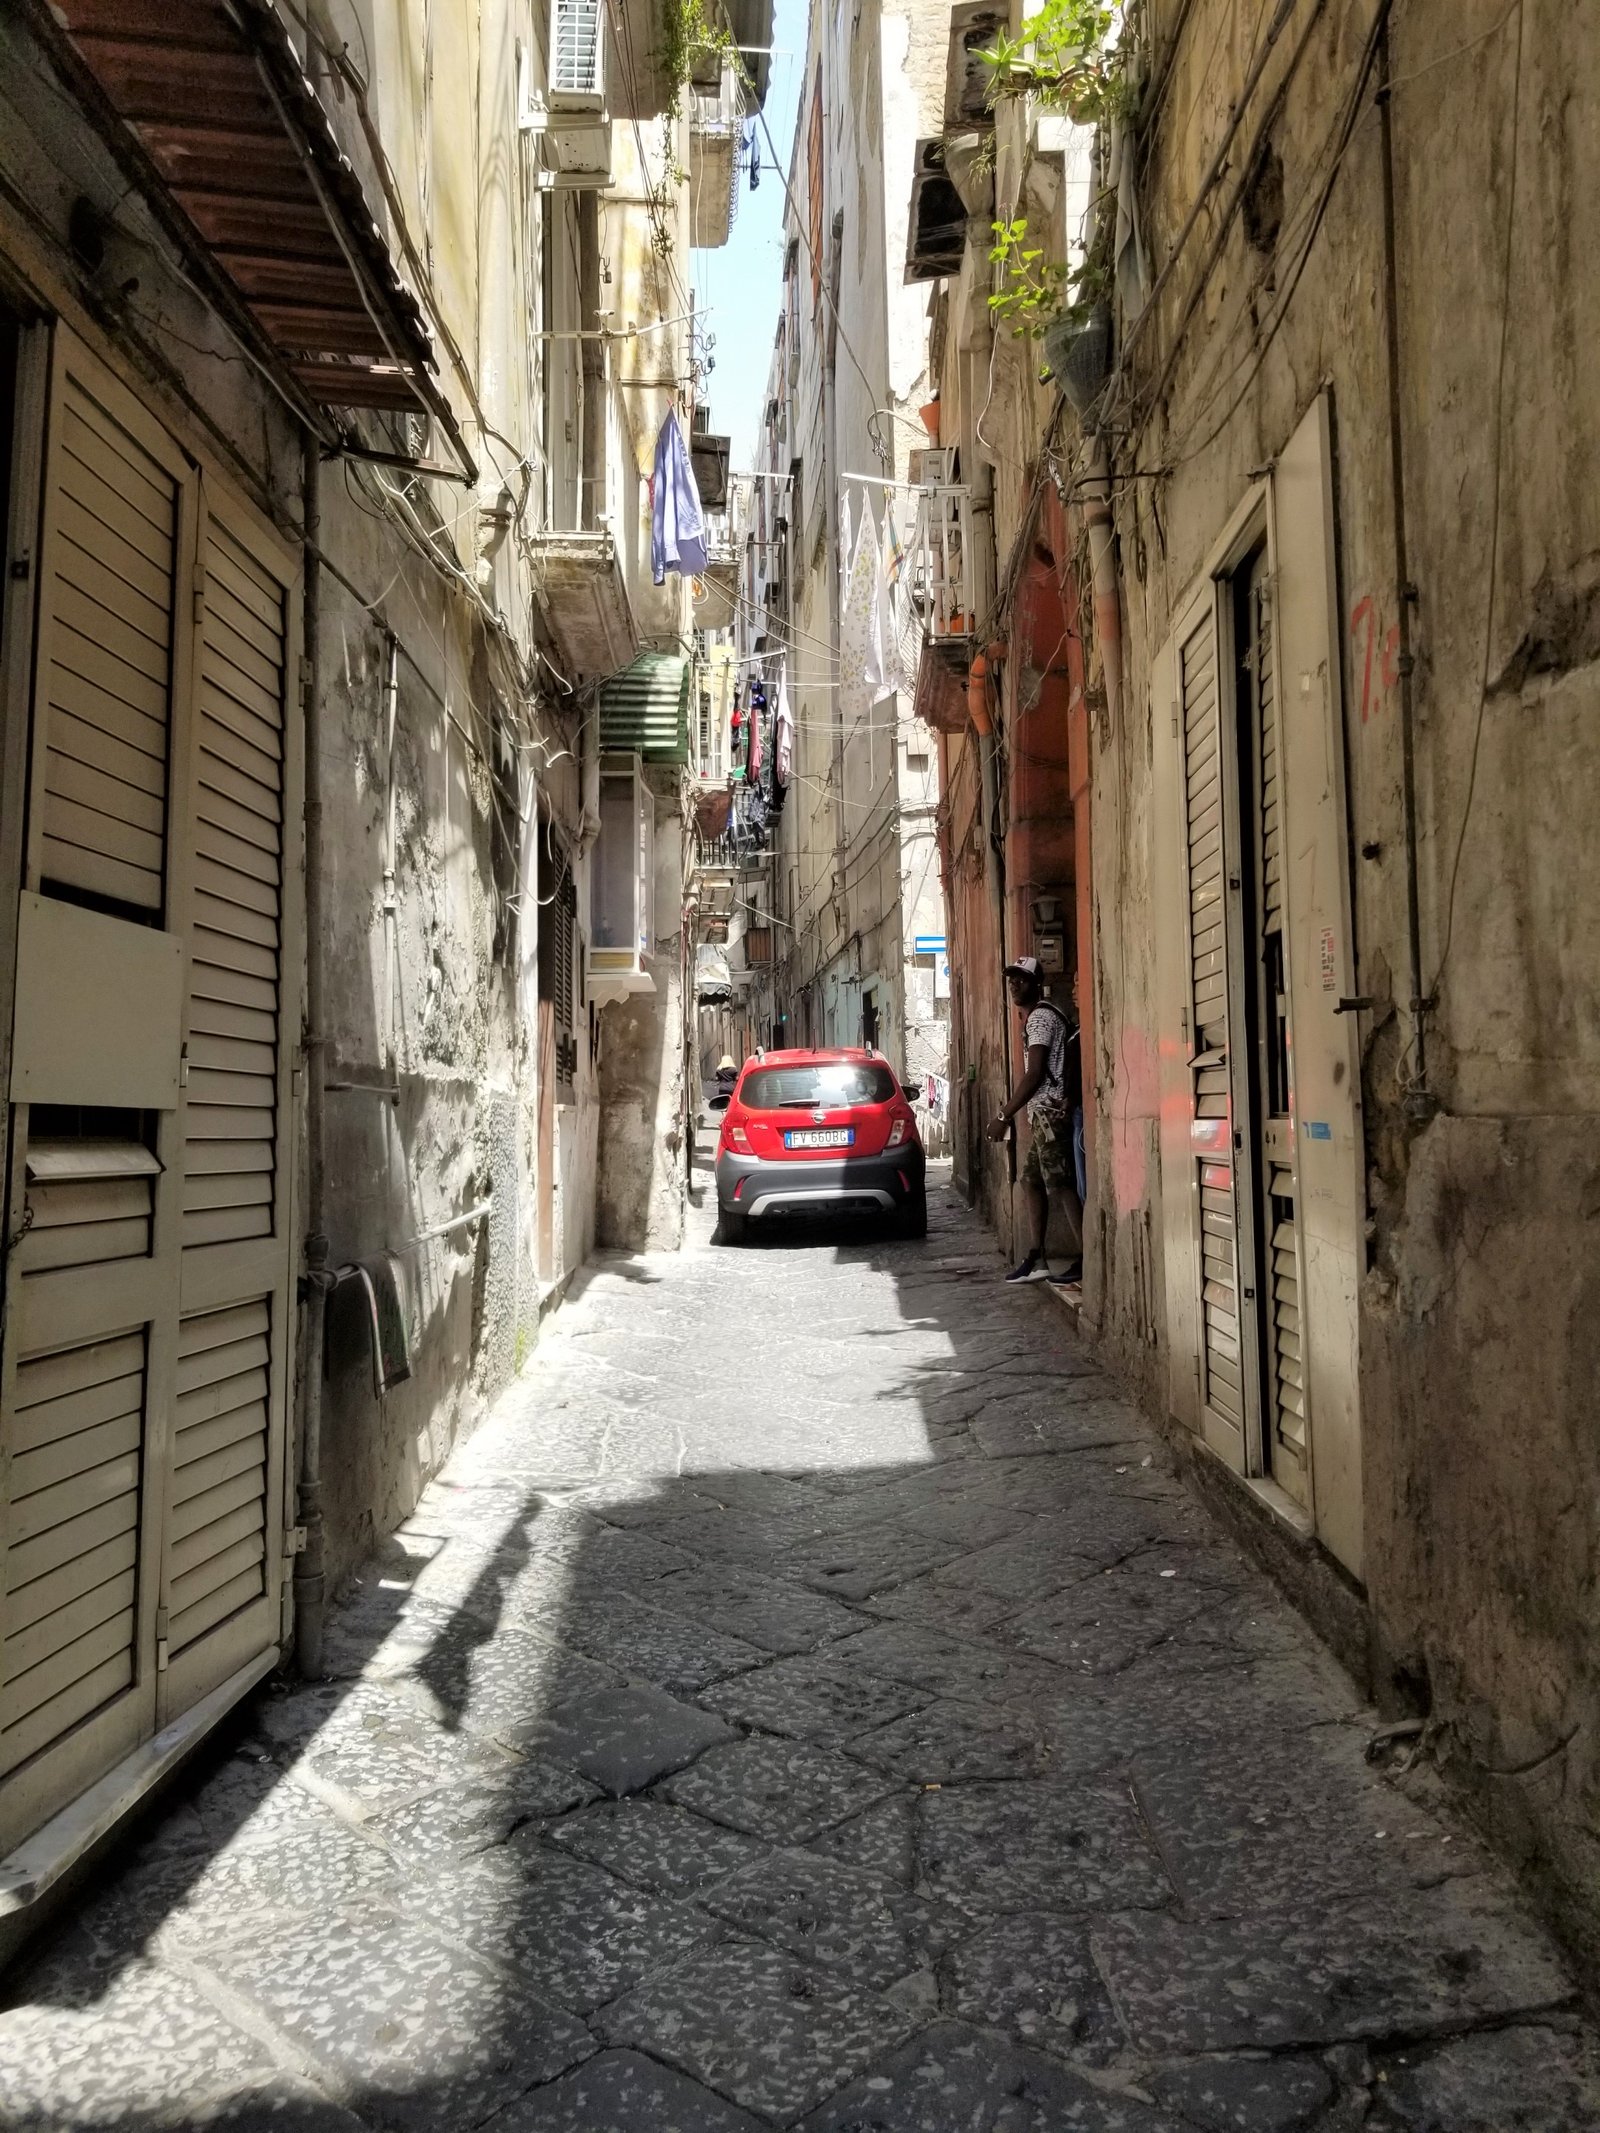 Months 7&8, our one year adventure through Italy. Highlights from months 7 & 8, ouritalianjourney.com, https://ouritalianjourney.com/months-7-8-1-year-adventure-in-italy